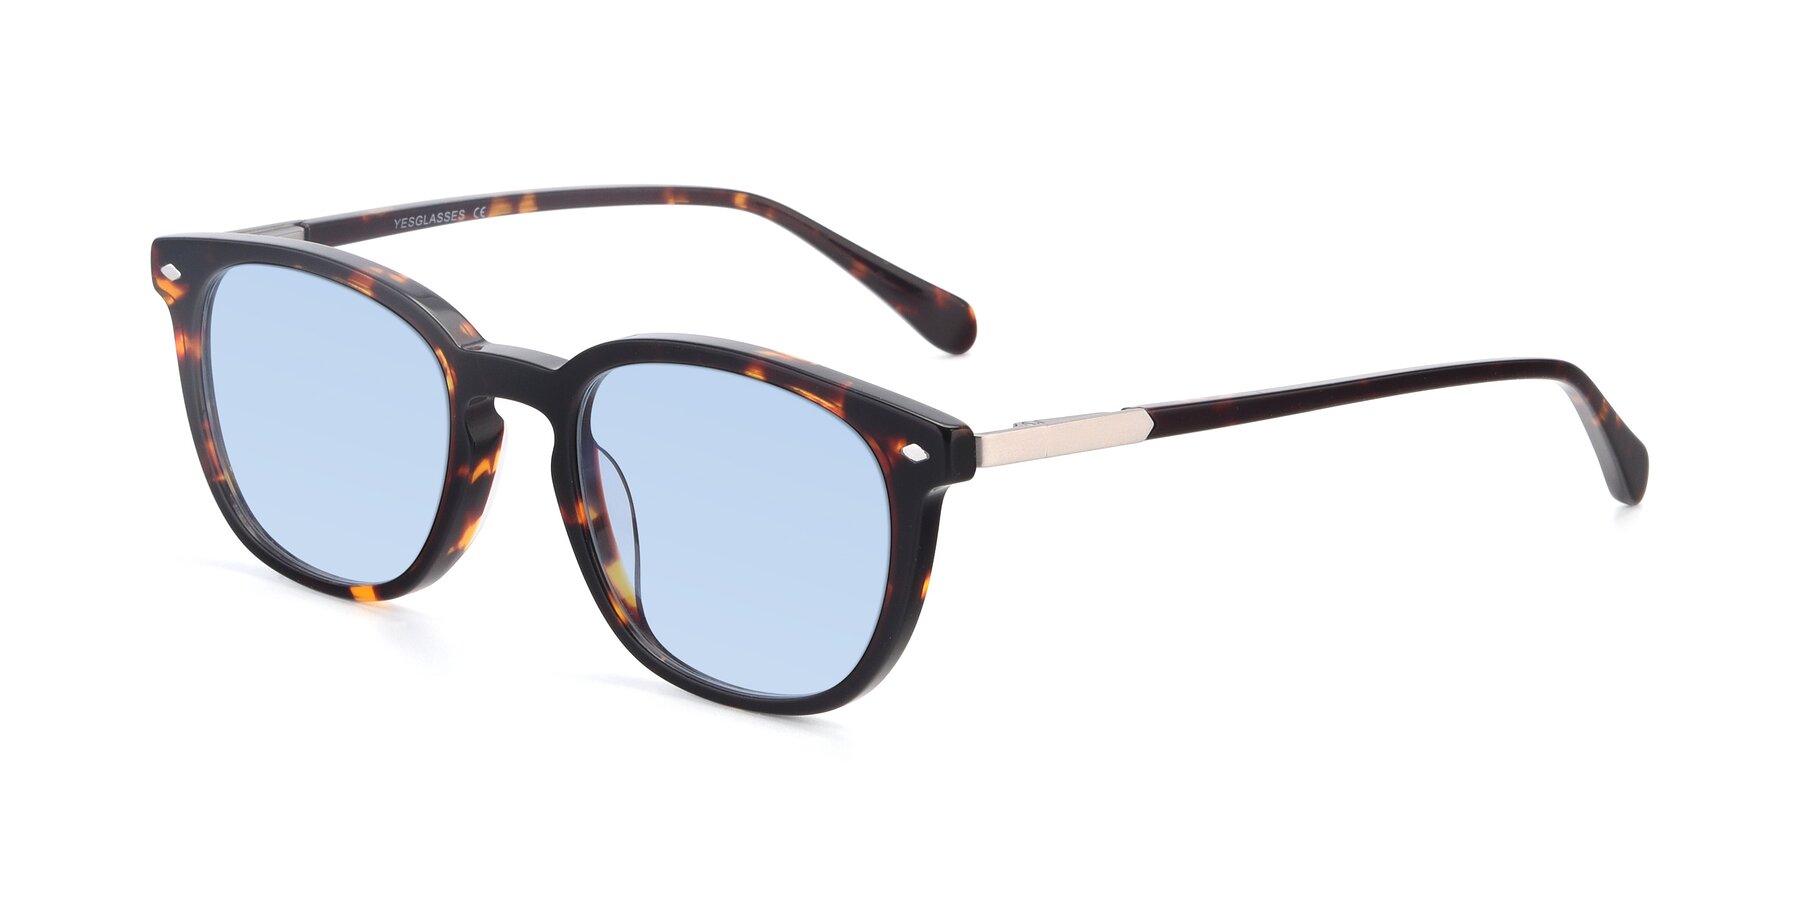 Angle of 17578 in Tortoise with Light Blue Tinted Lenses